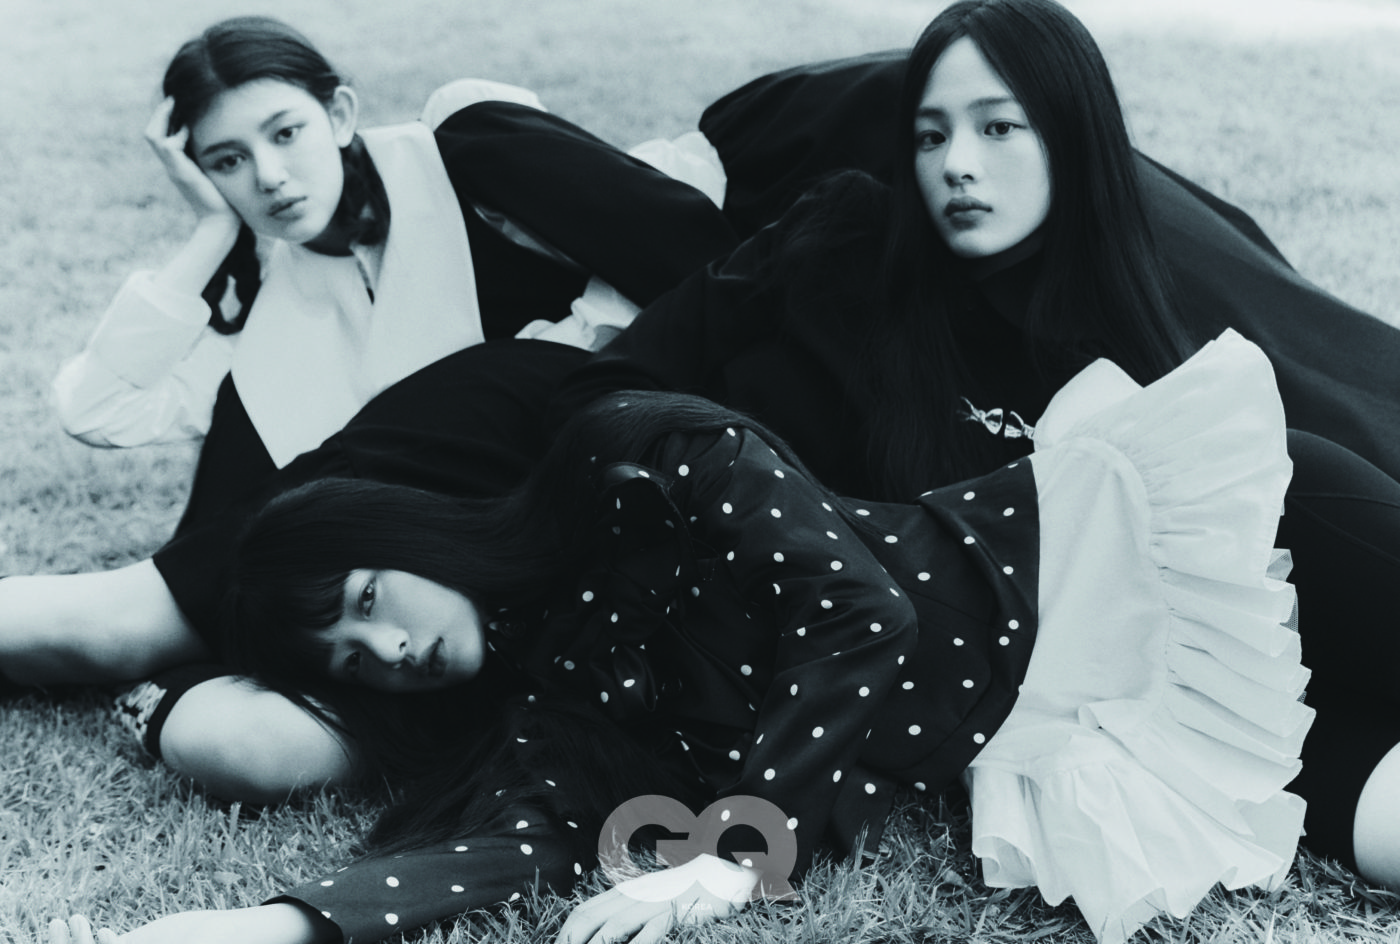 NewJeans unveils group pictorial with dreamy charm... sensual style look